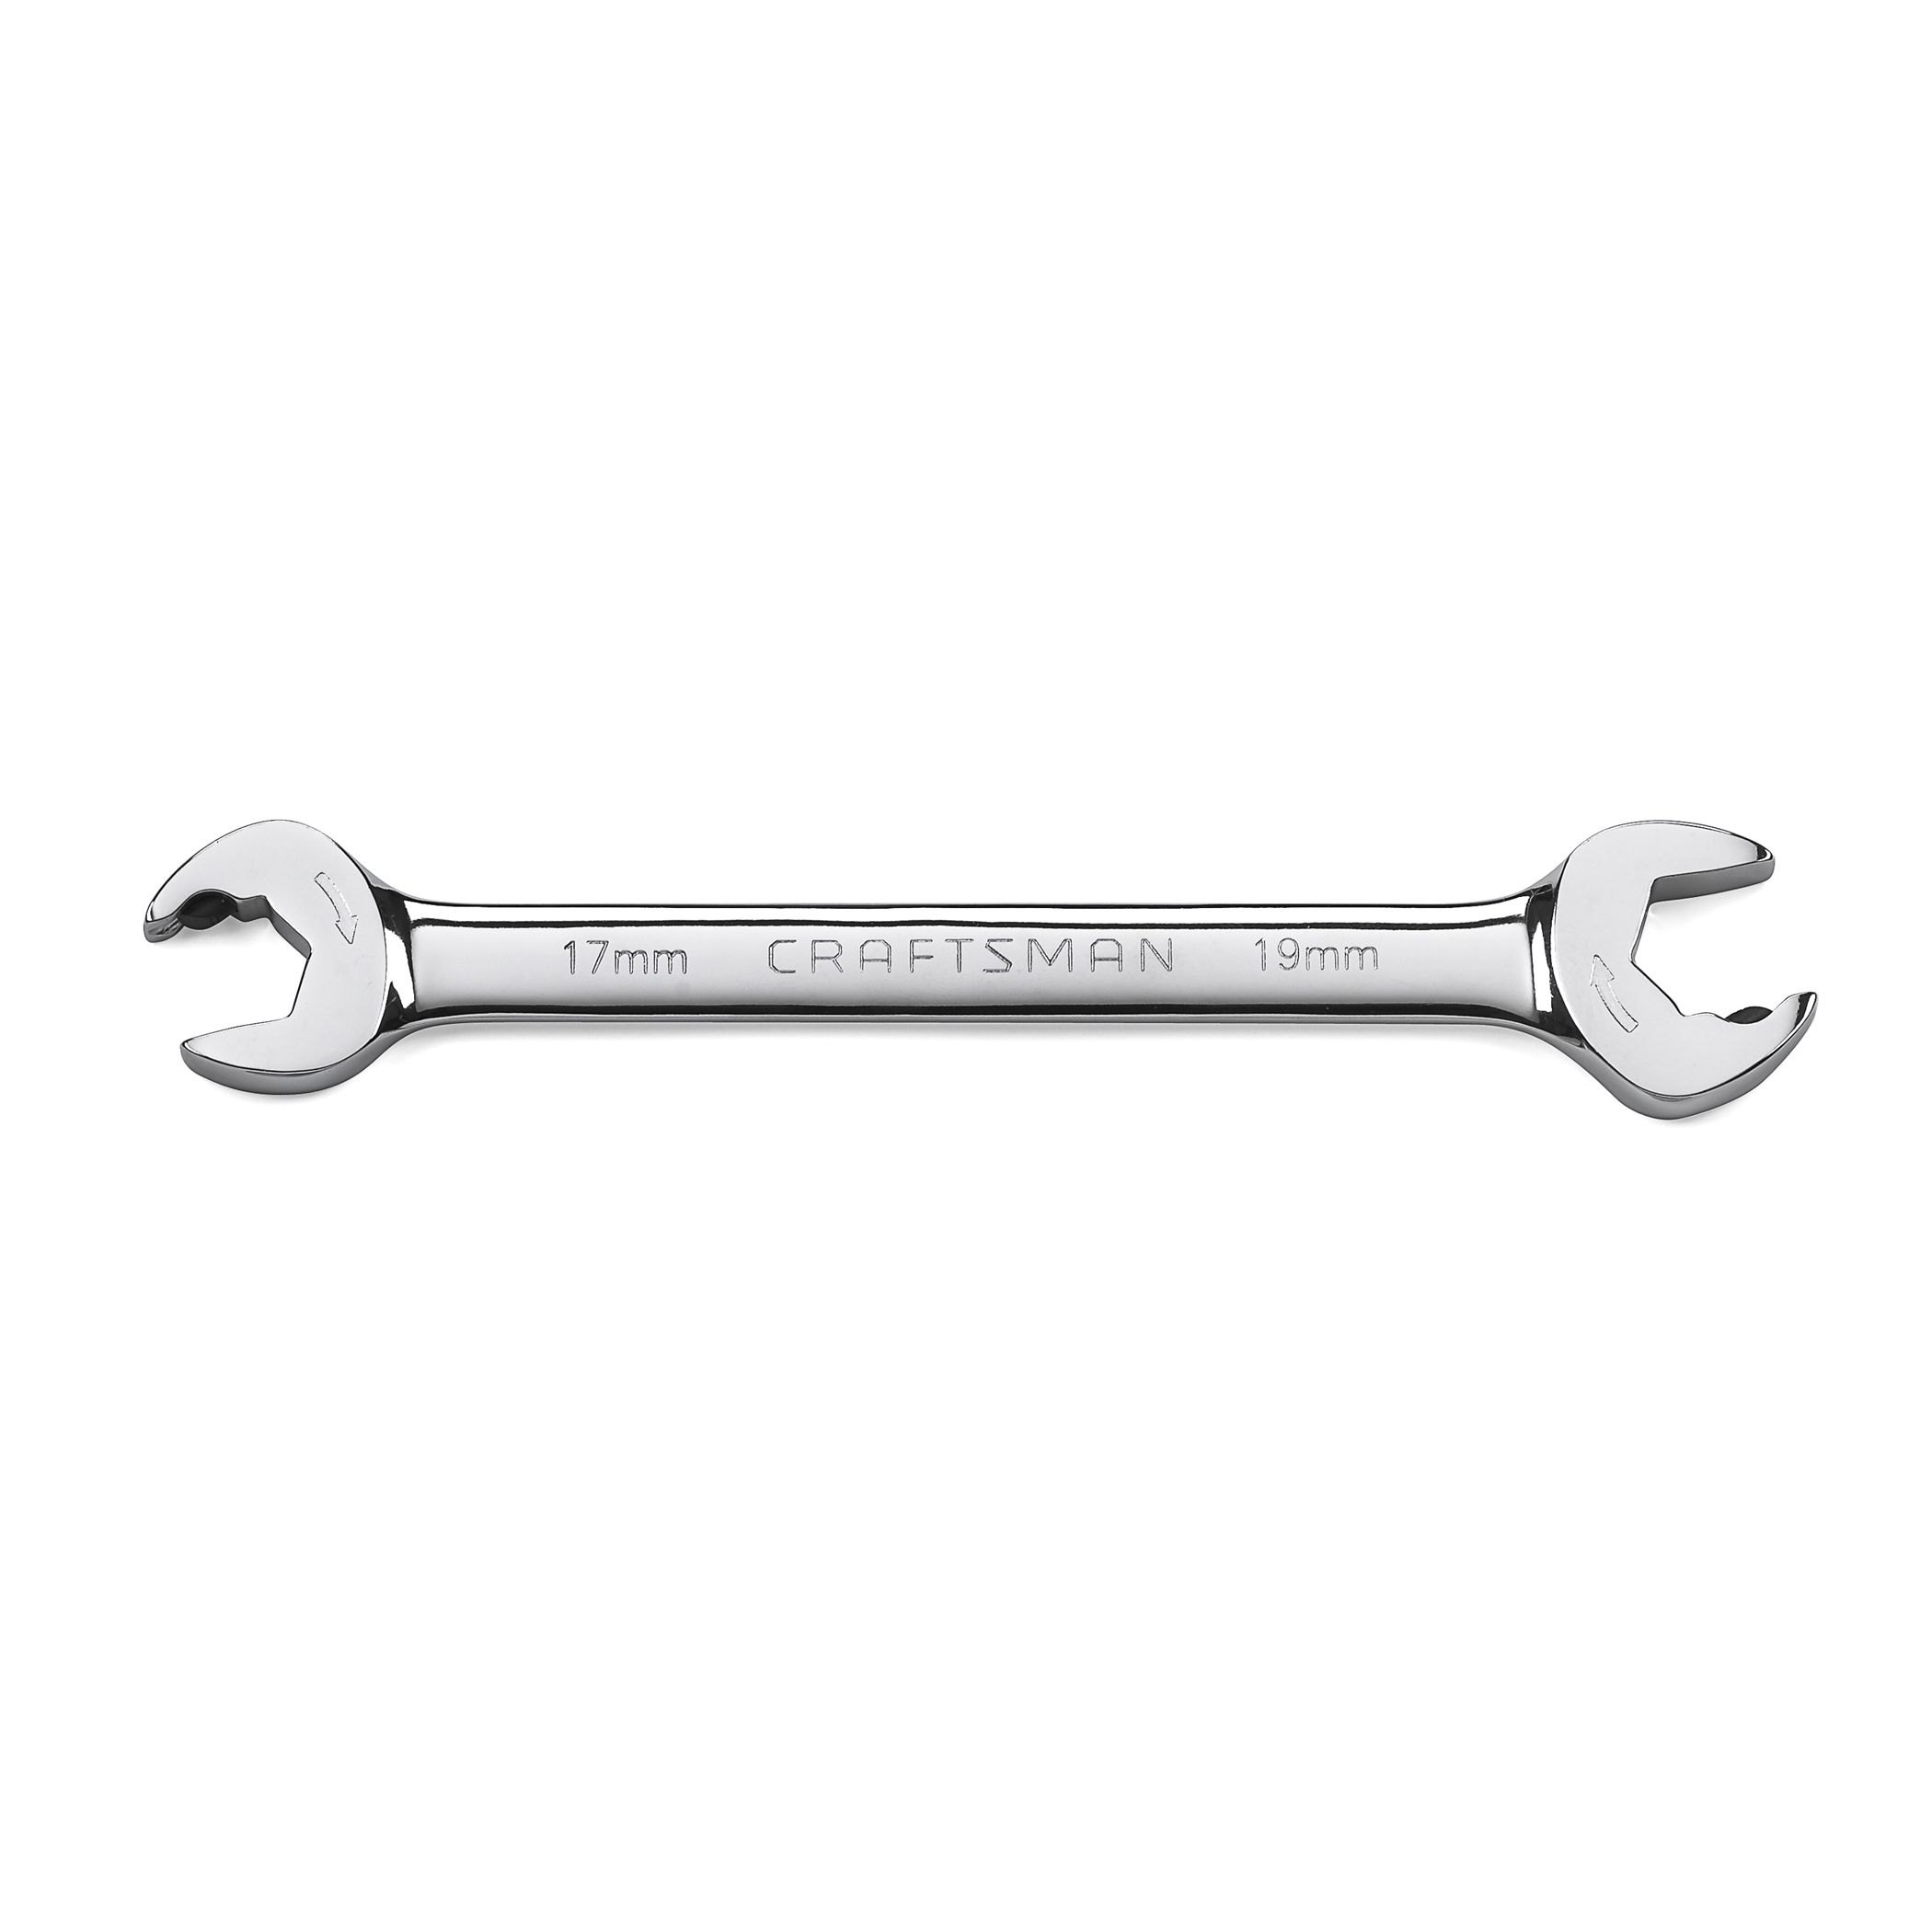 Craftsman 17 x 19 mm Open End Ratcheting Wrench